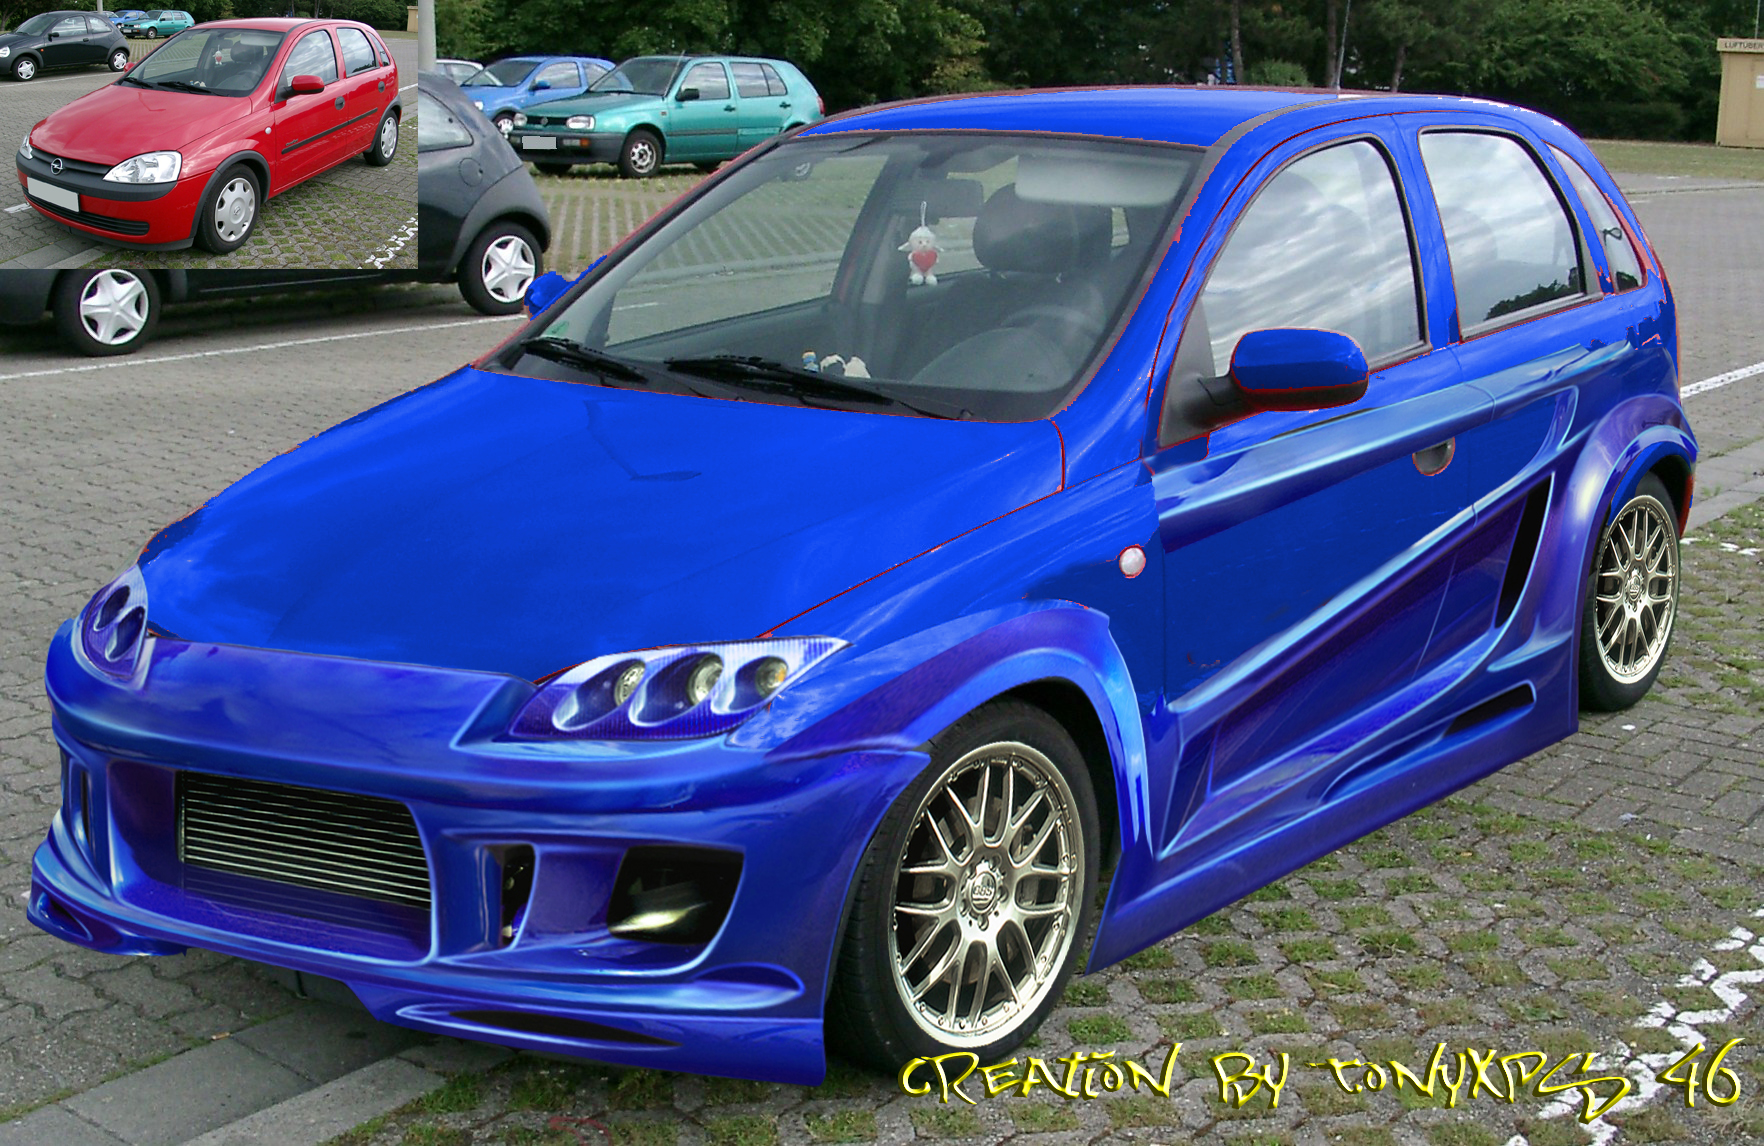 Opel corsa tuning By me by Kira46 on DeviantArt